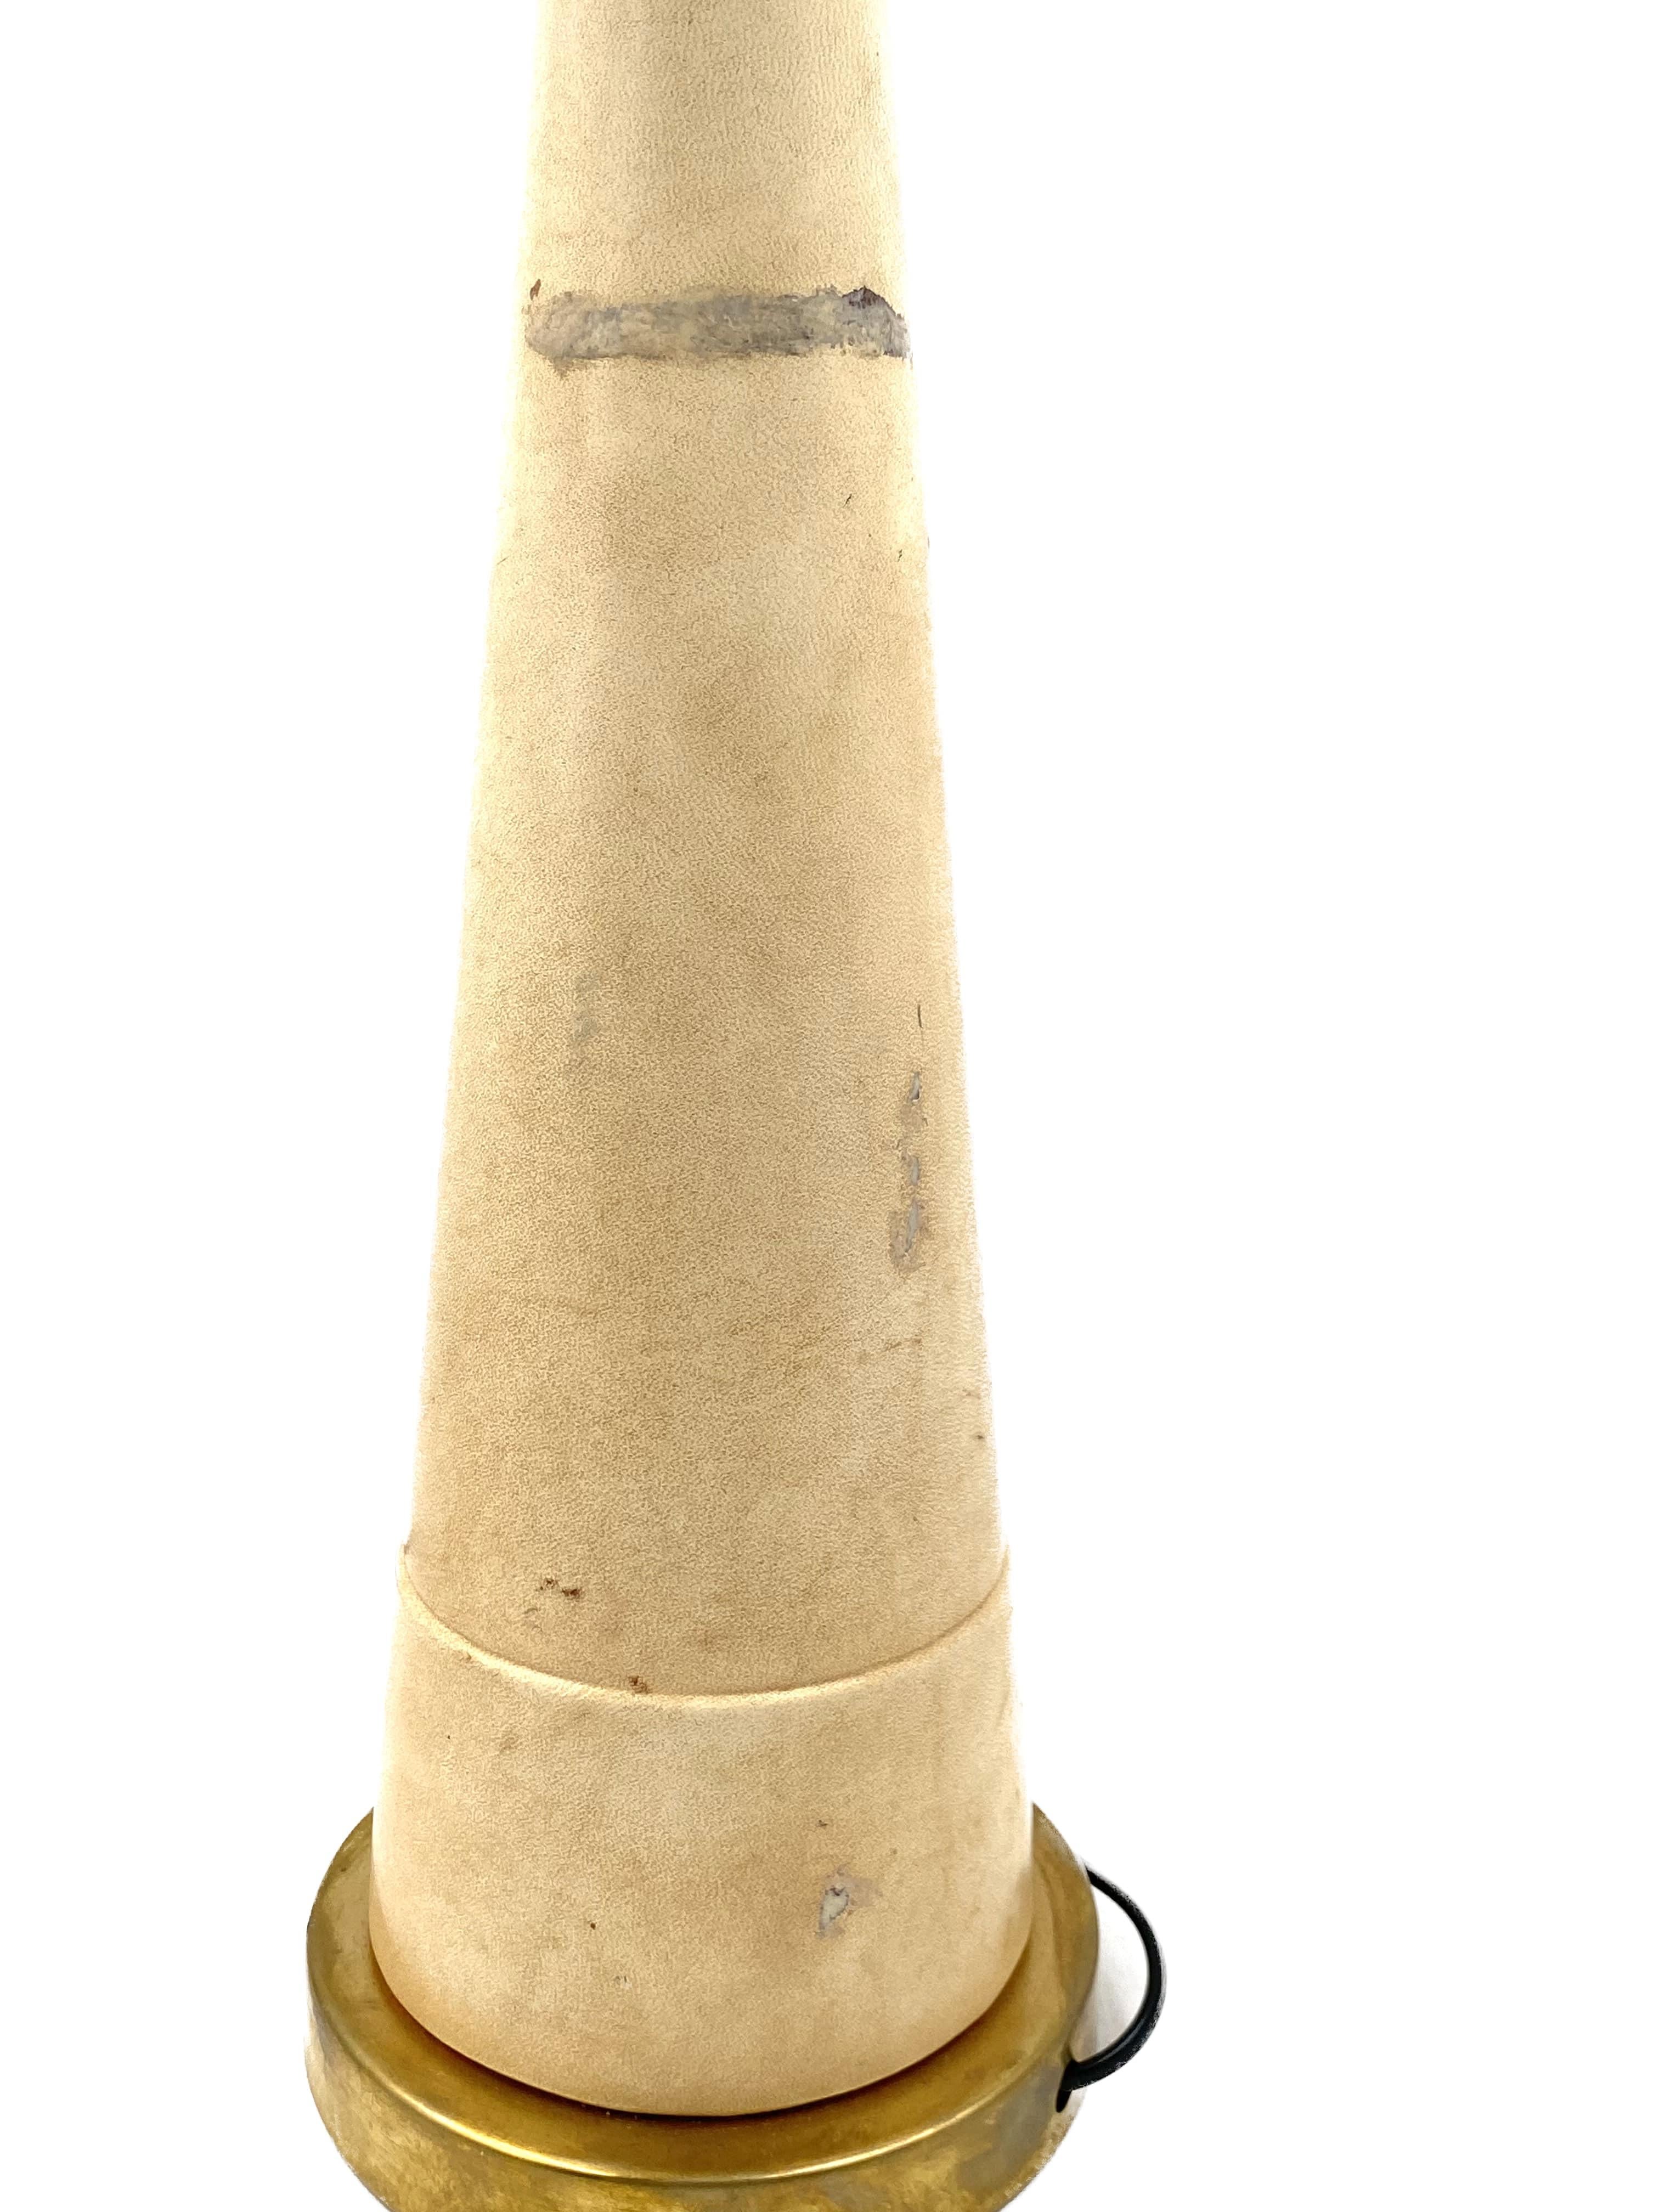 Monumental Conic Parchment and Brass Table Lamp, France, 1960 For Sale 11